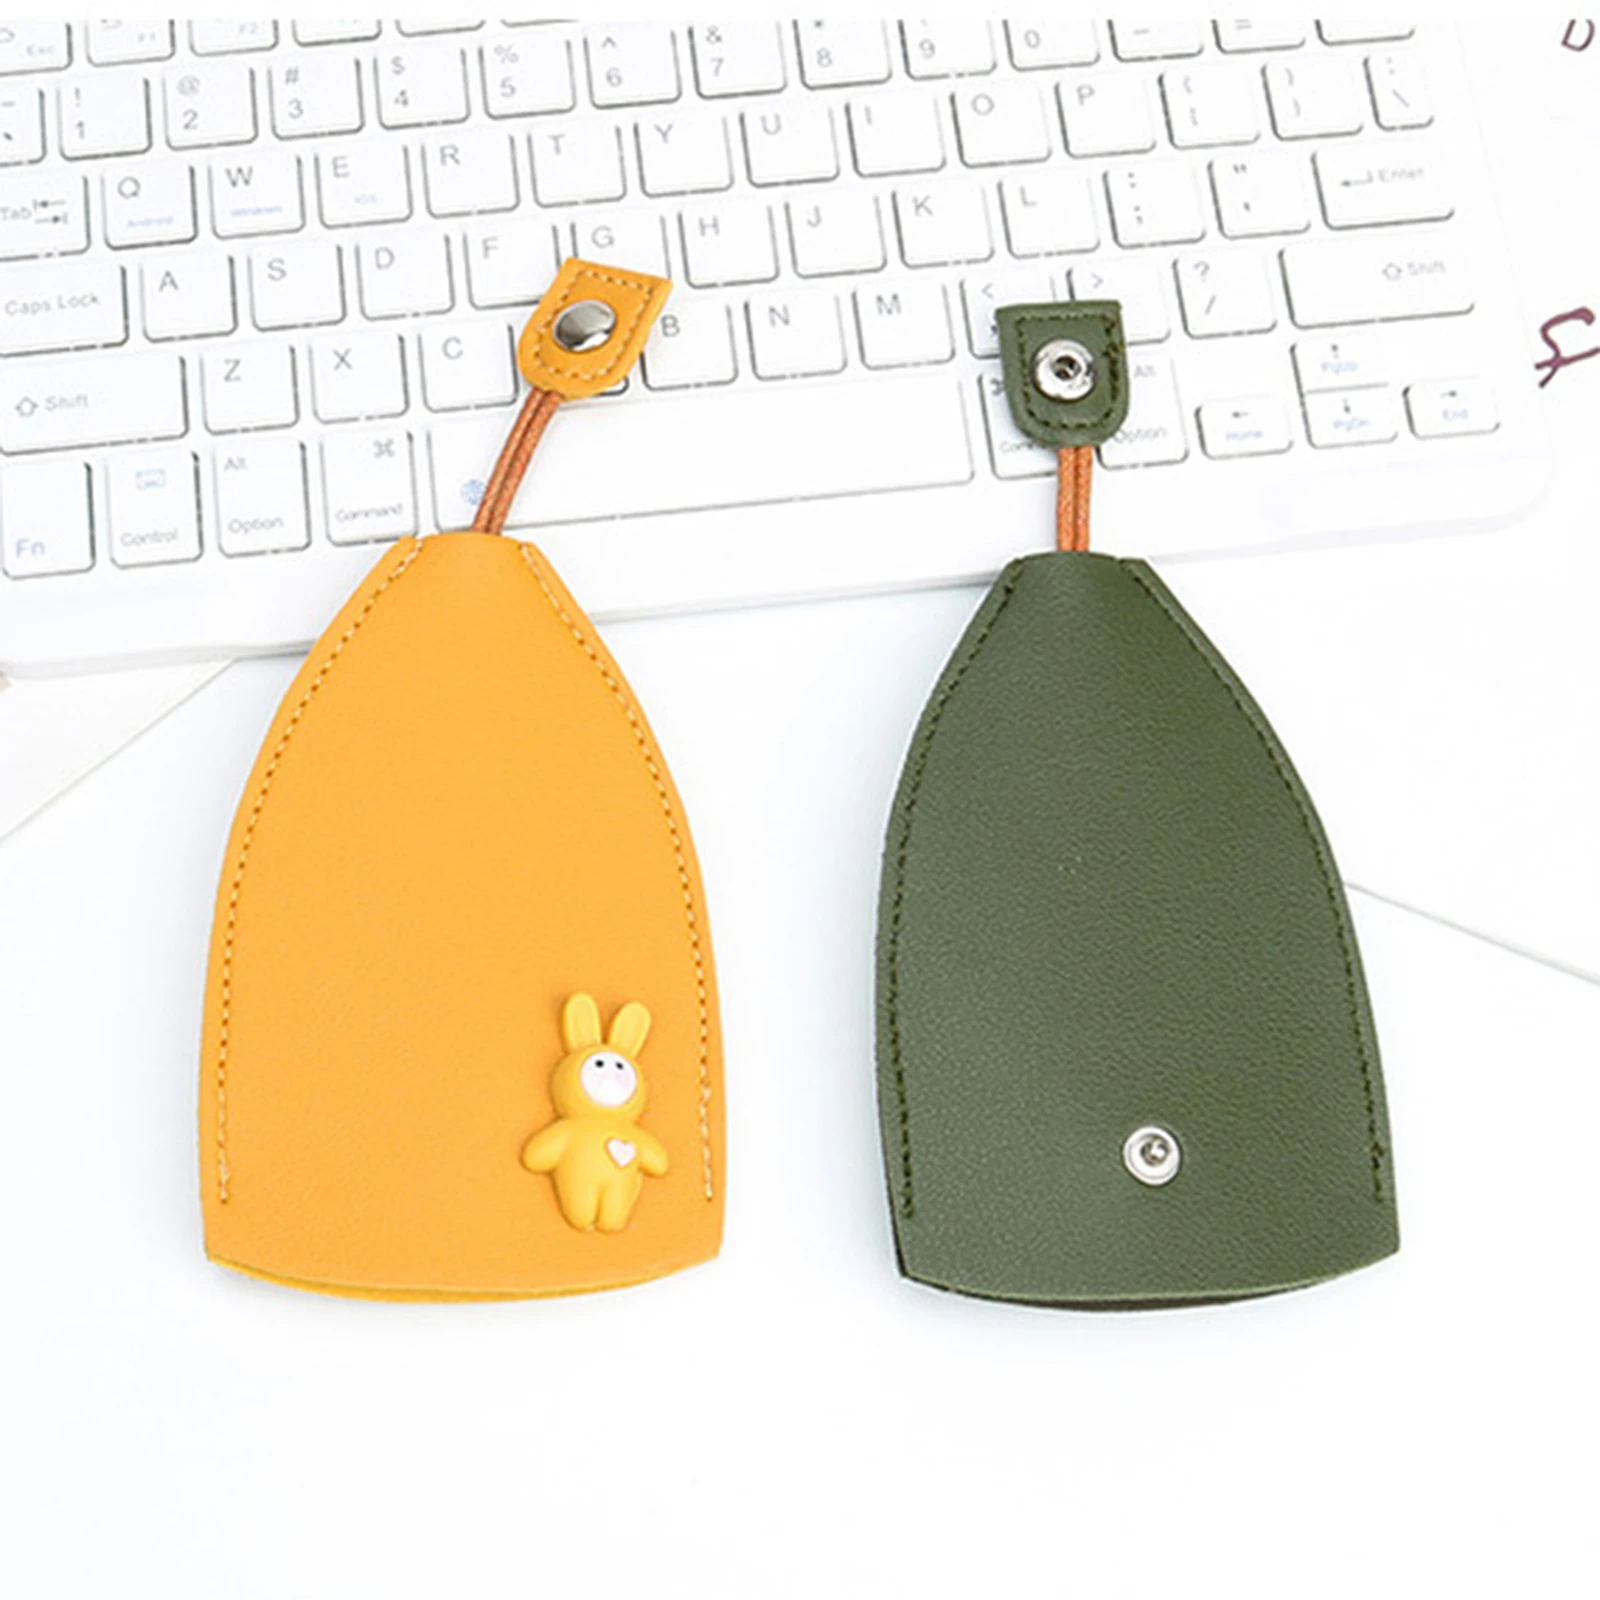 Cute Rabbit Creative Pull Type Key Bag PU Leather Key Wallets Housekeepers Car Key Holder Case Leather Keychain Pouch Sleeve